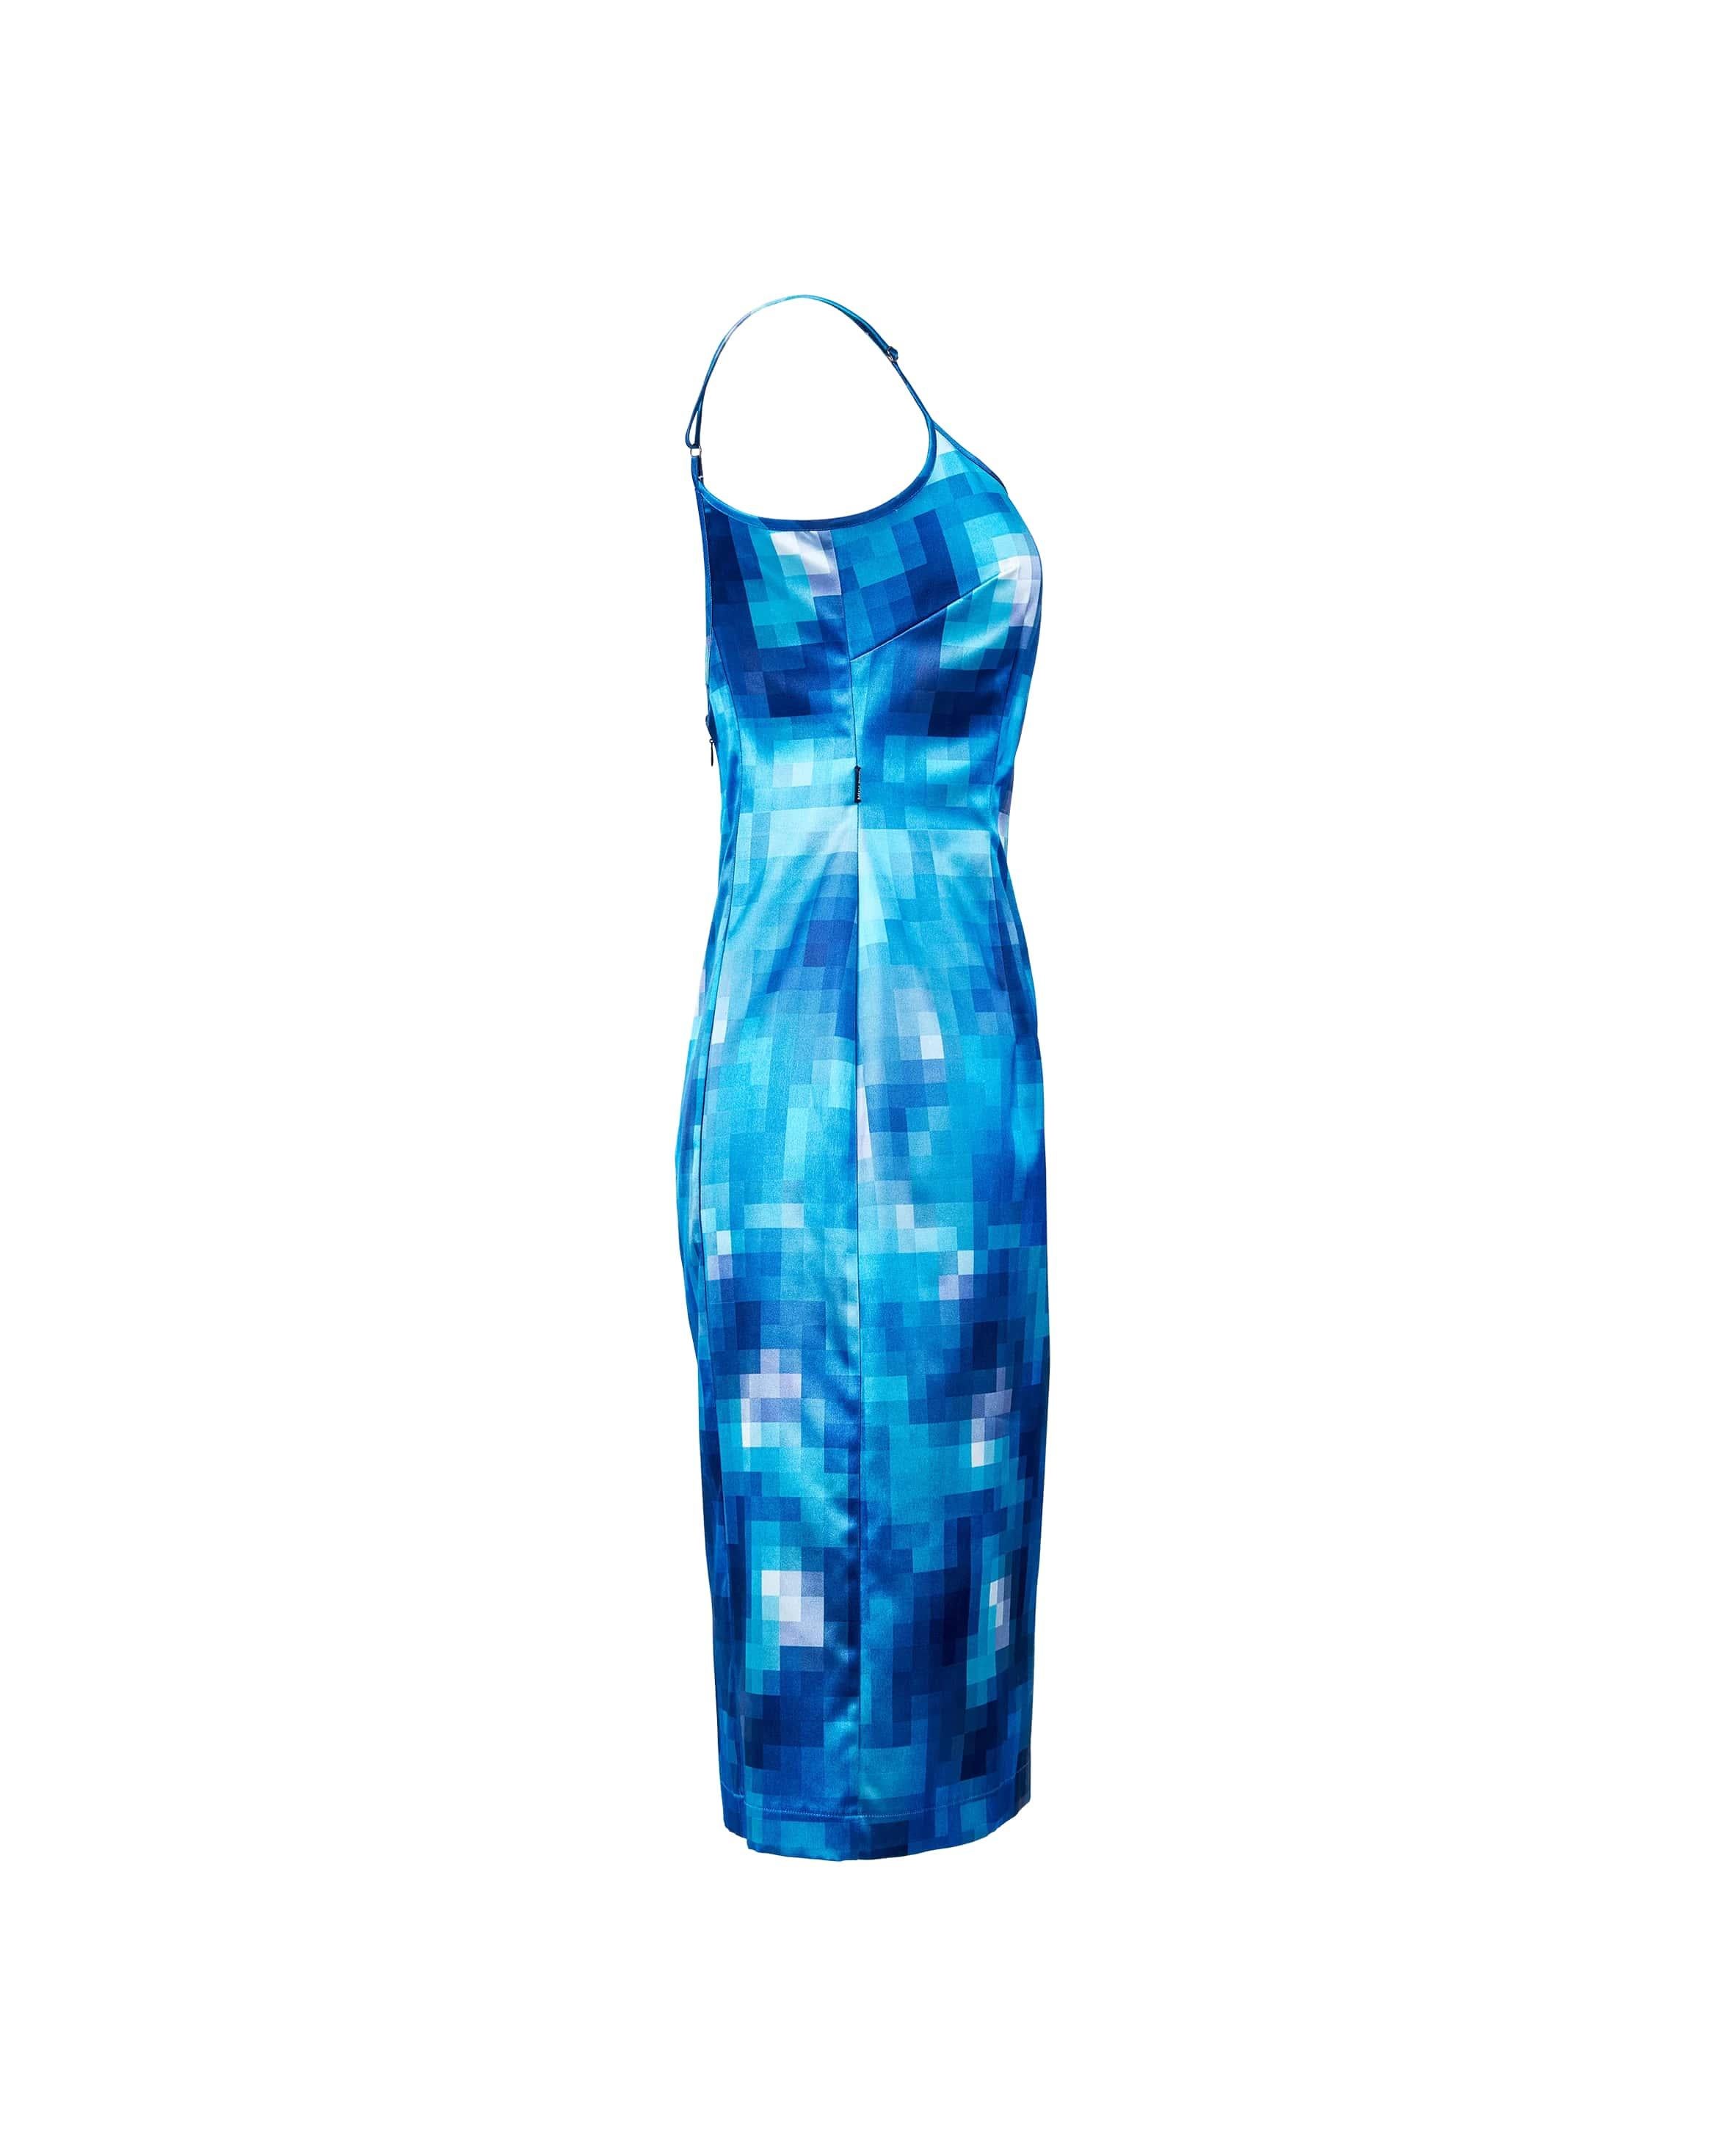 2000's Moschino Jeans blue pixel gradient pattern midi dress. Adjustable spaghetti straps and fitted waist with hidden back zip closure. Fabric contents unmarked; feels like silk blend with moderate stretch throughout. 